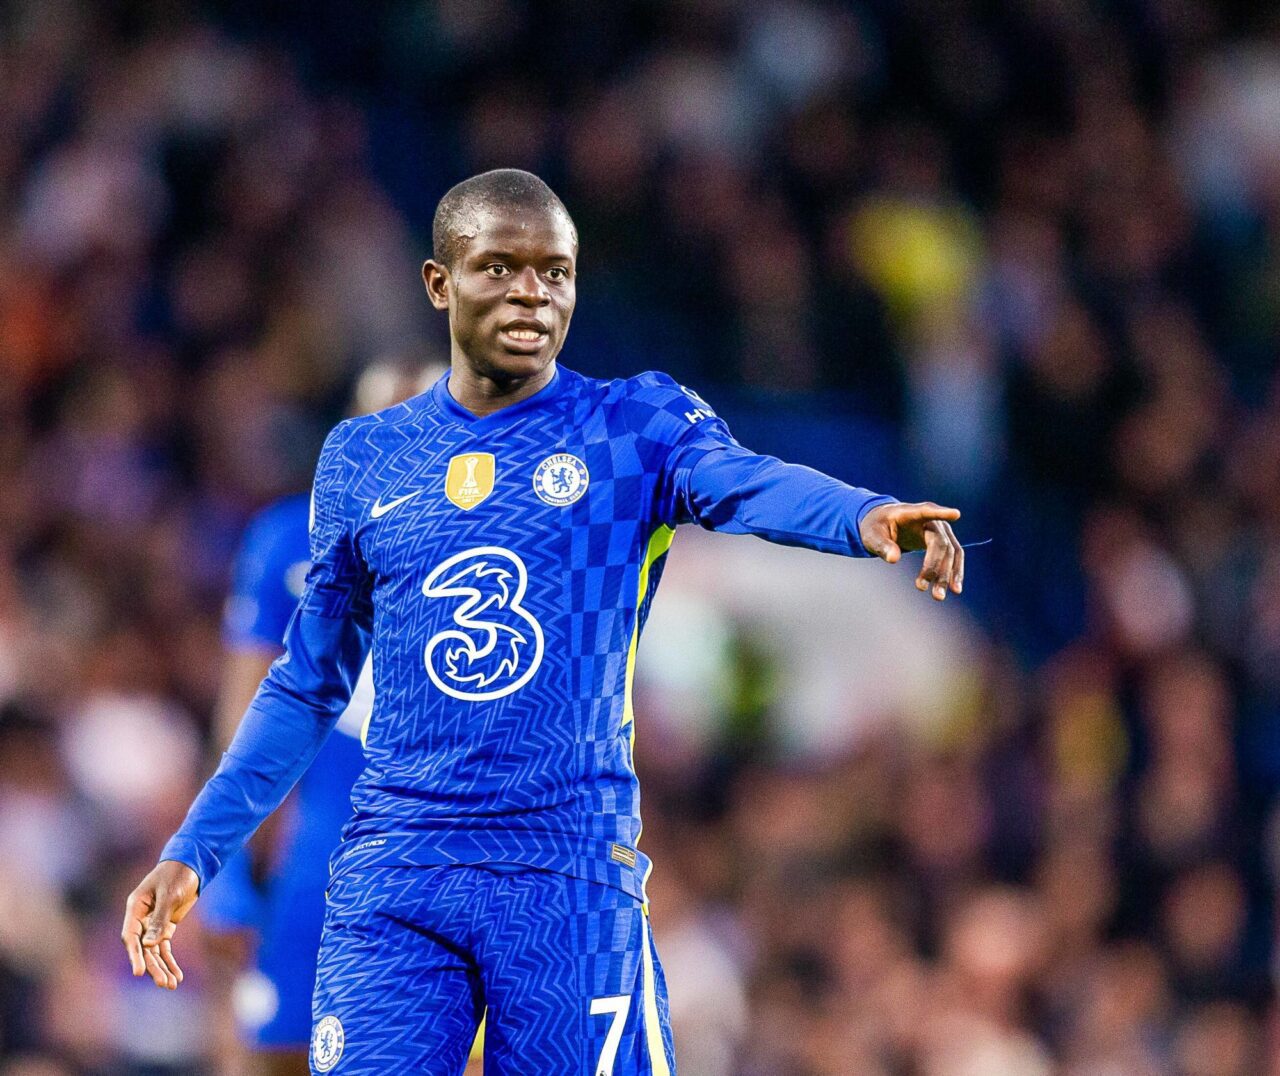 Ngolo Kante could leave Chelsea during the 2022 summer transfer window